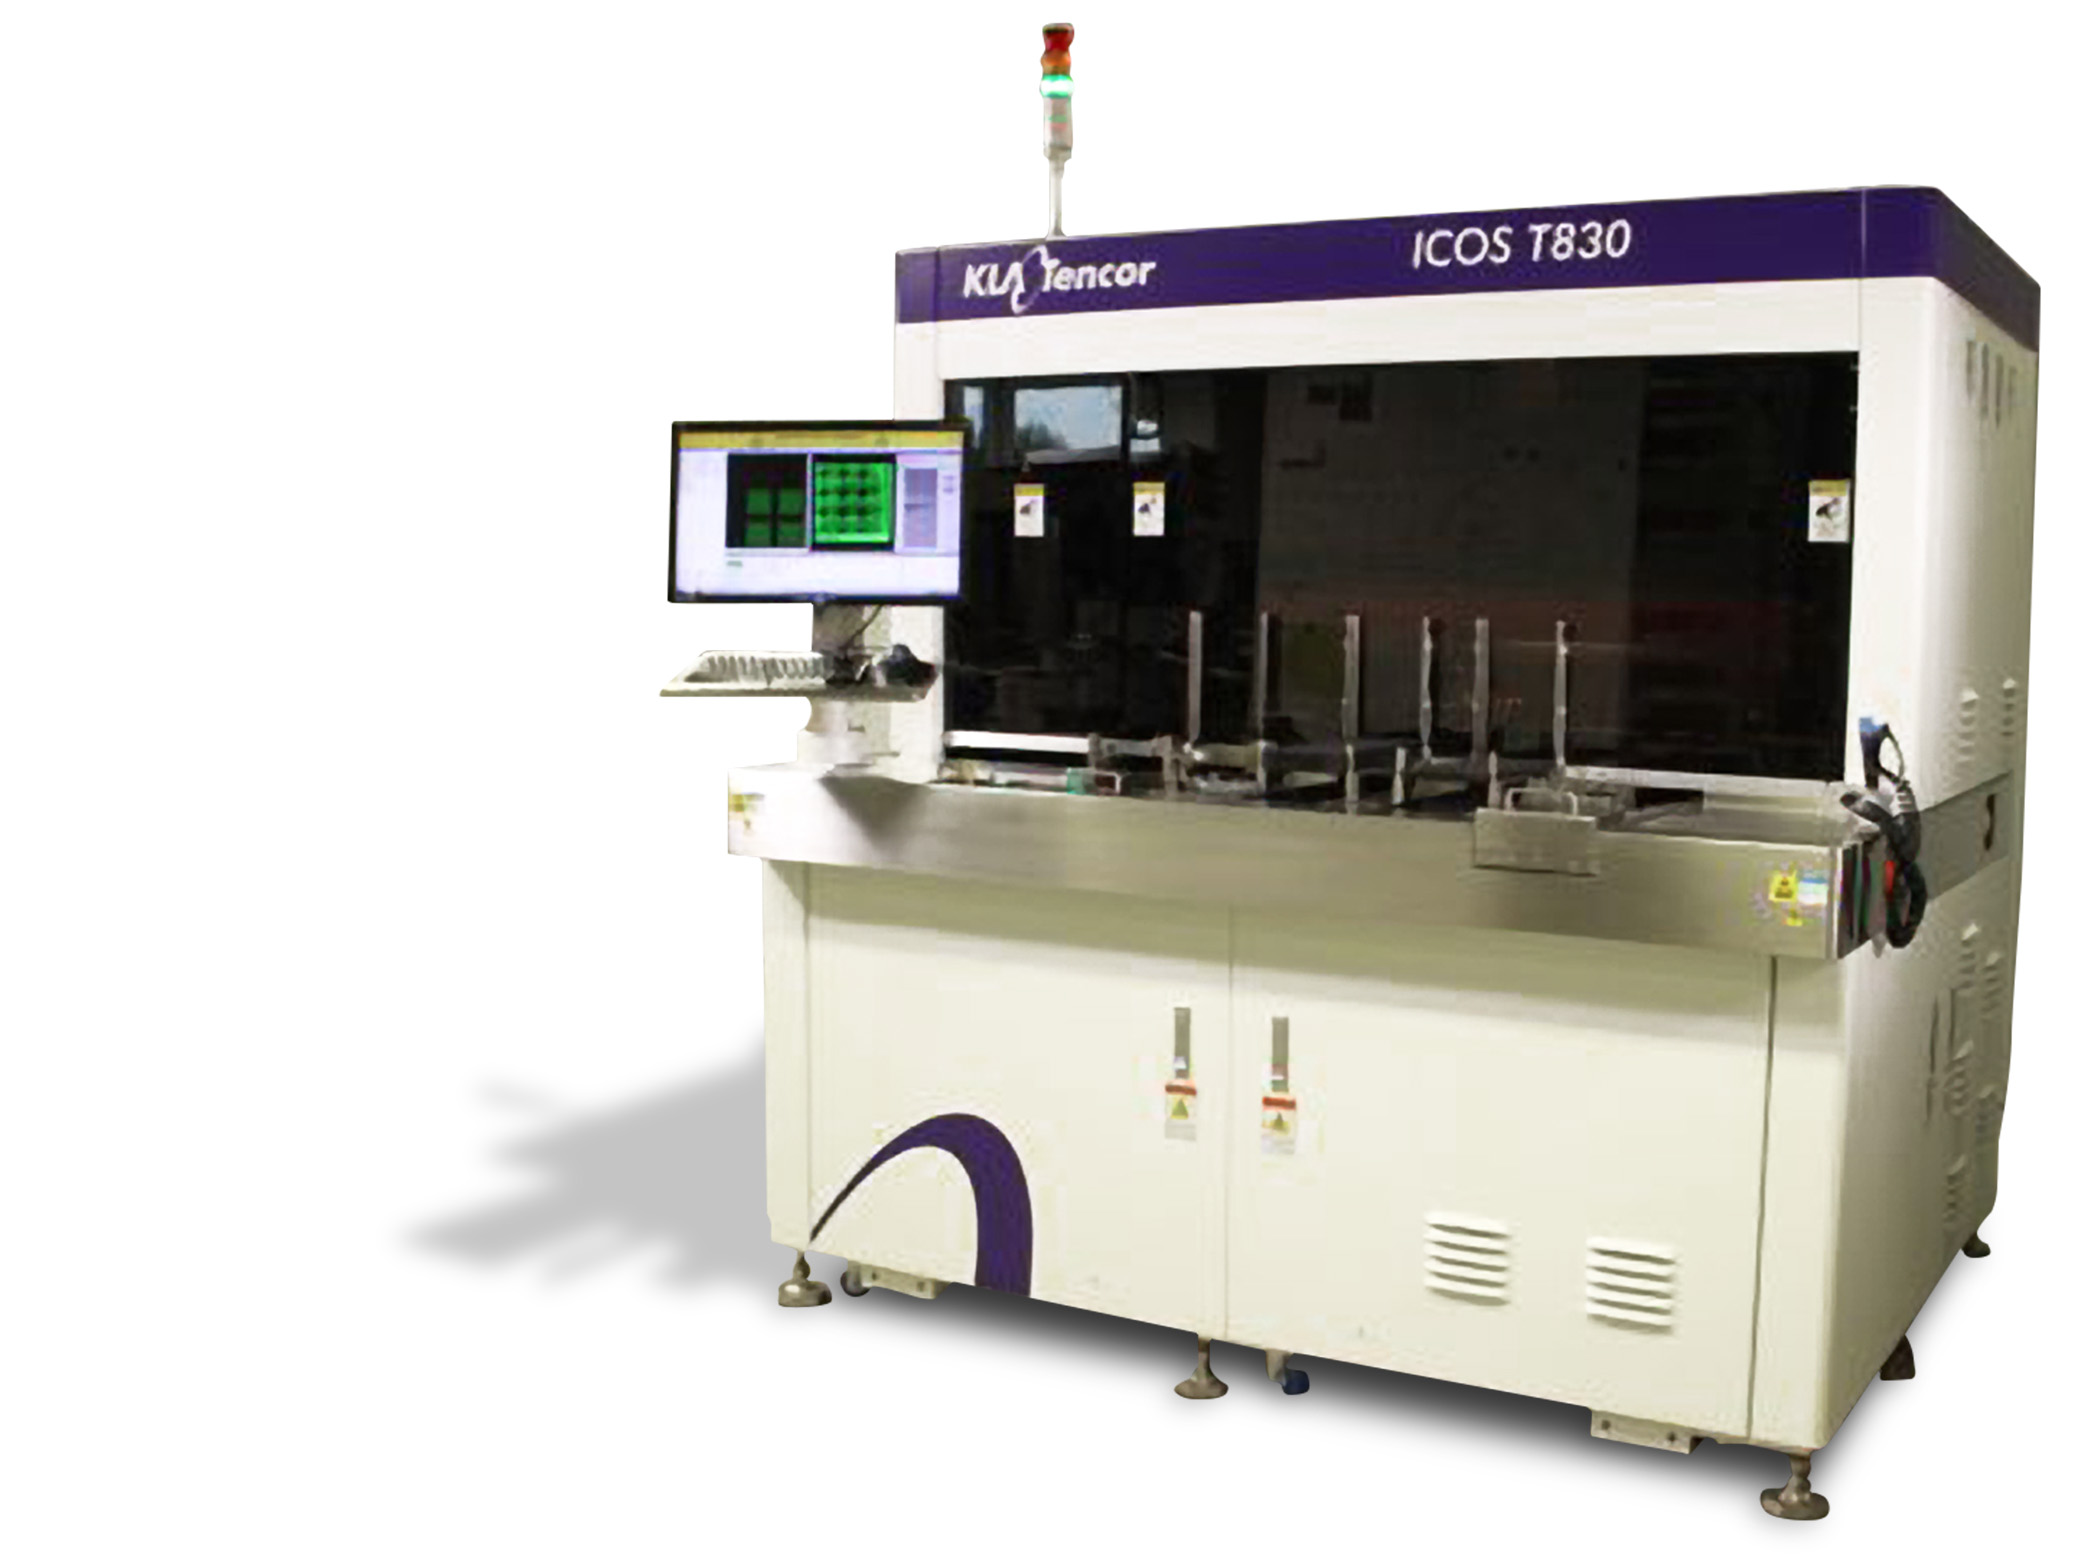 KLA-Tencor’s ICOS® T830 offers high-performance optical inspection of packaged integrated circuit (IC) components, providing accurate feedback on package quality for a wide range of device types and sizes.